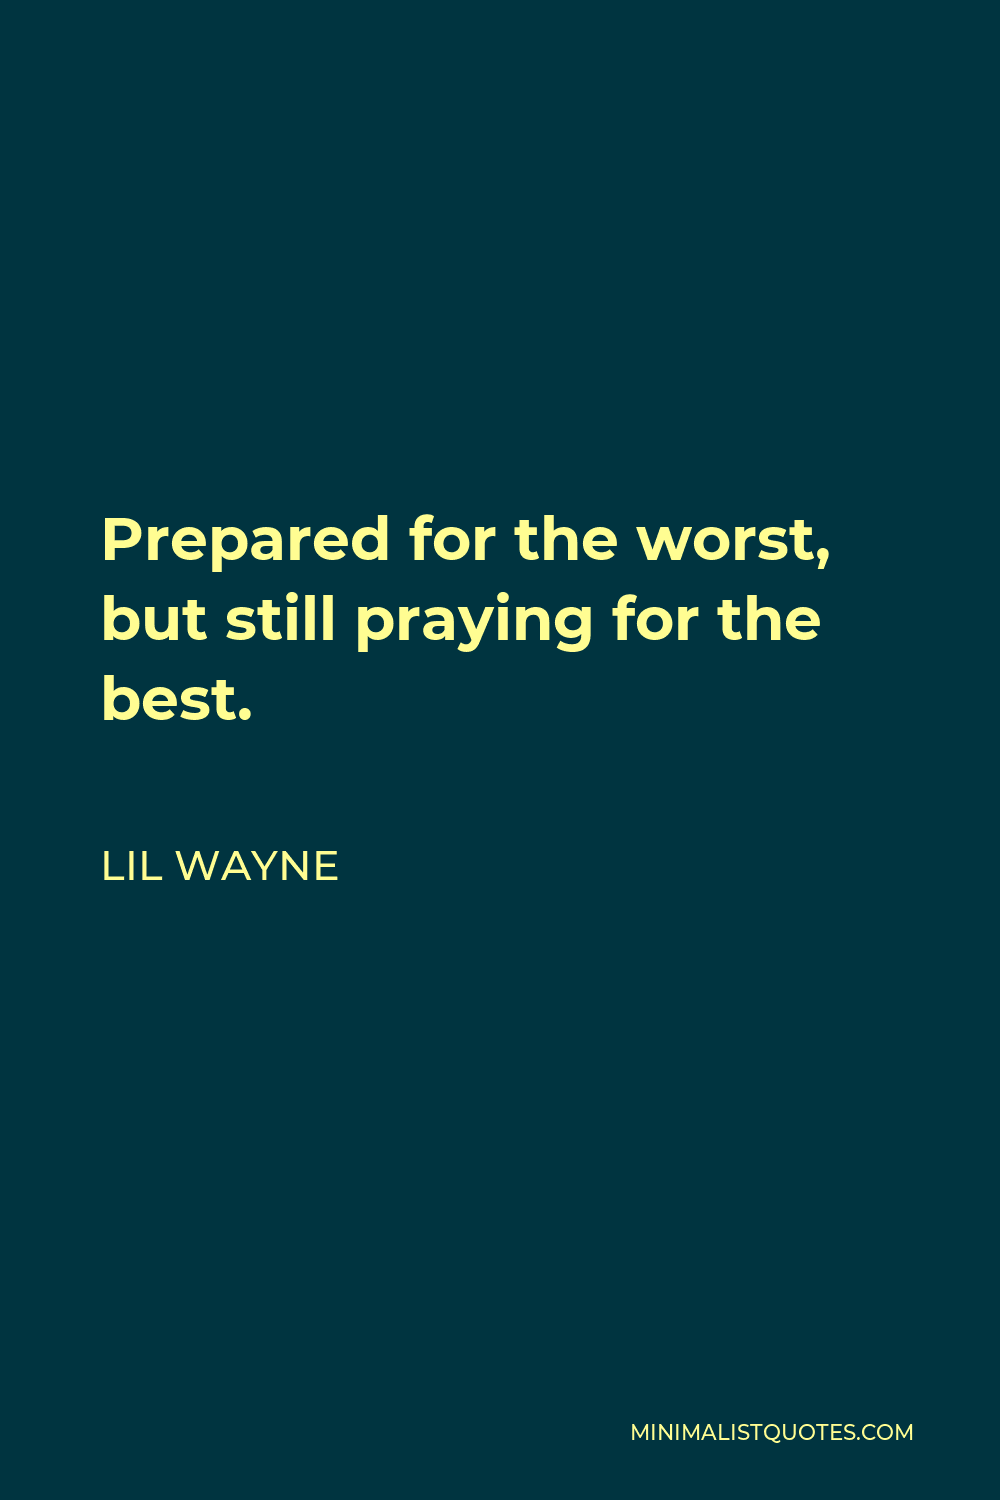 Lil Wayne Quote - Prepared for the worst, but still praying for the best.